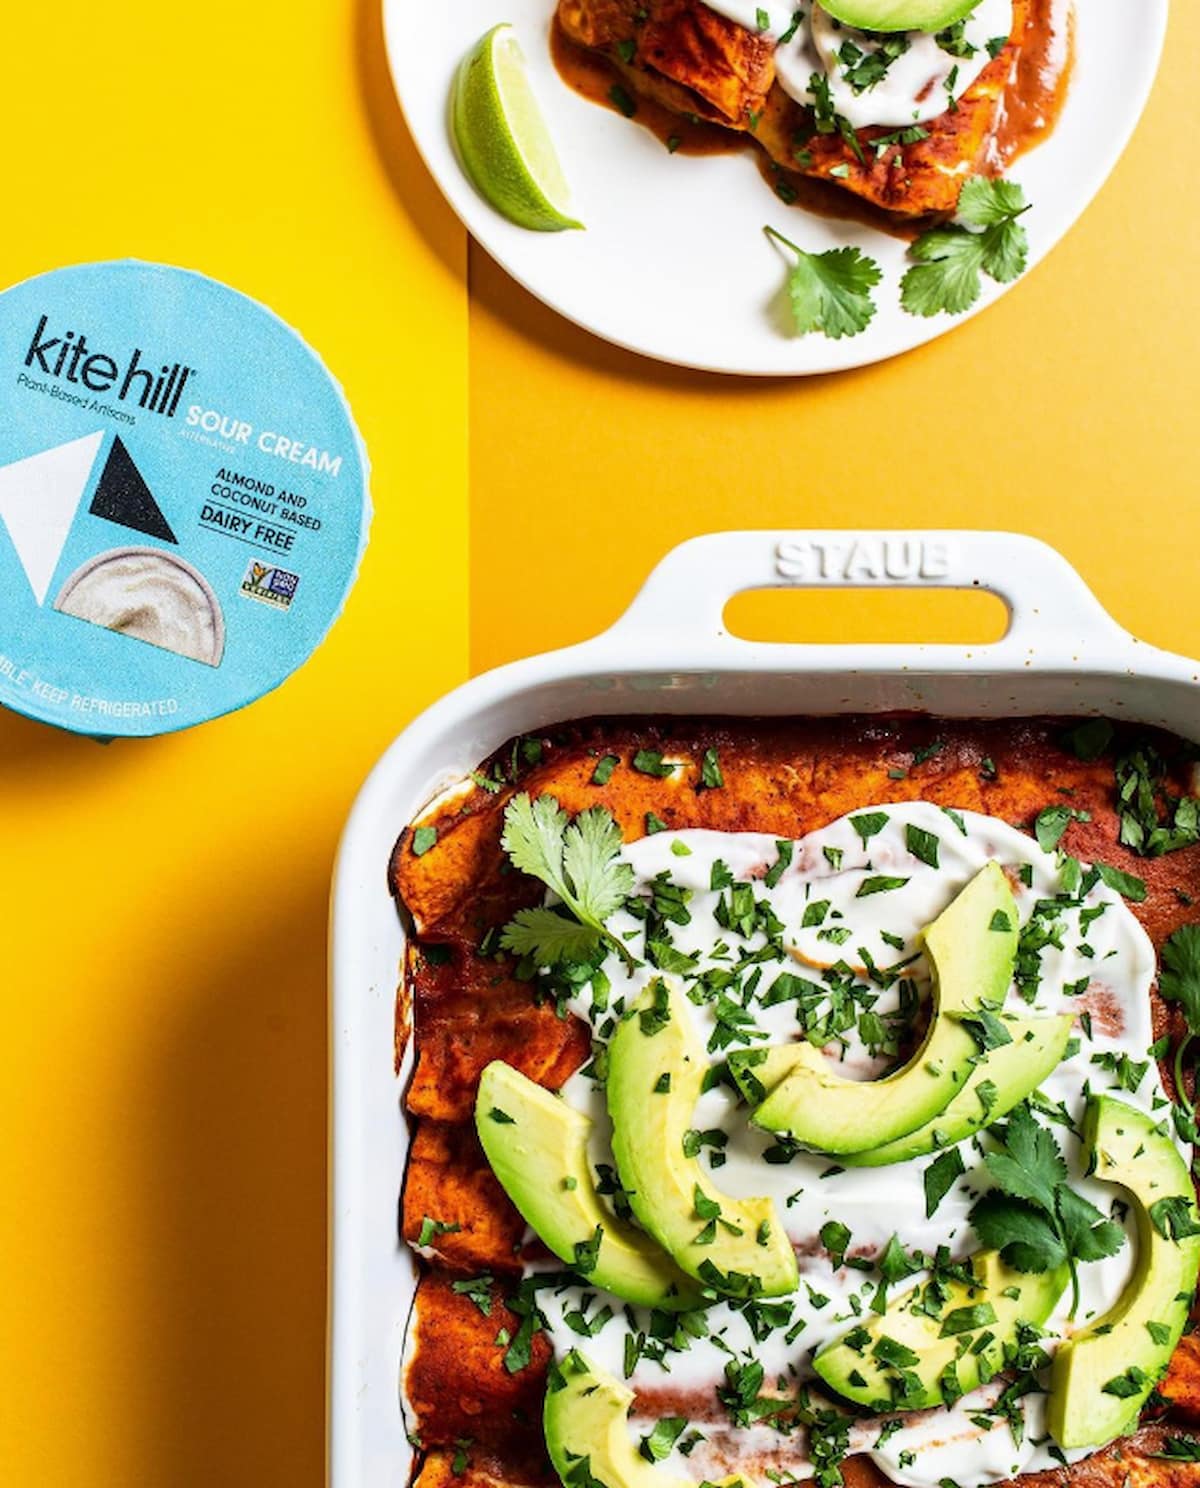 Kite Hill vegan sour cream container next to a casserole dish of plant-based enchiladas topped with vegan sour cream.